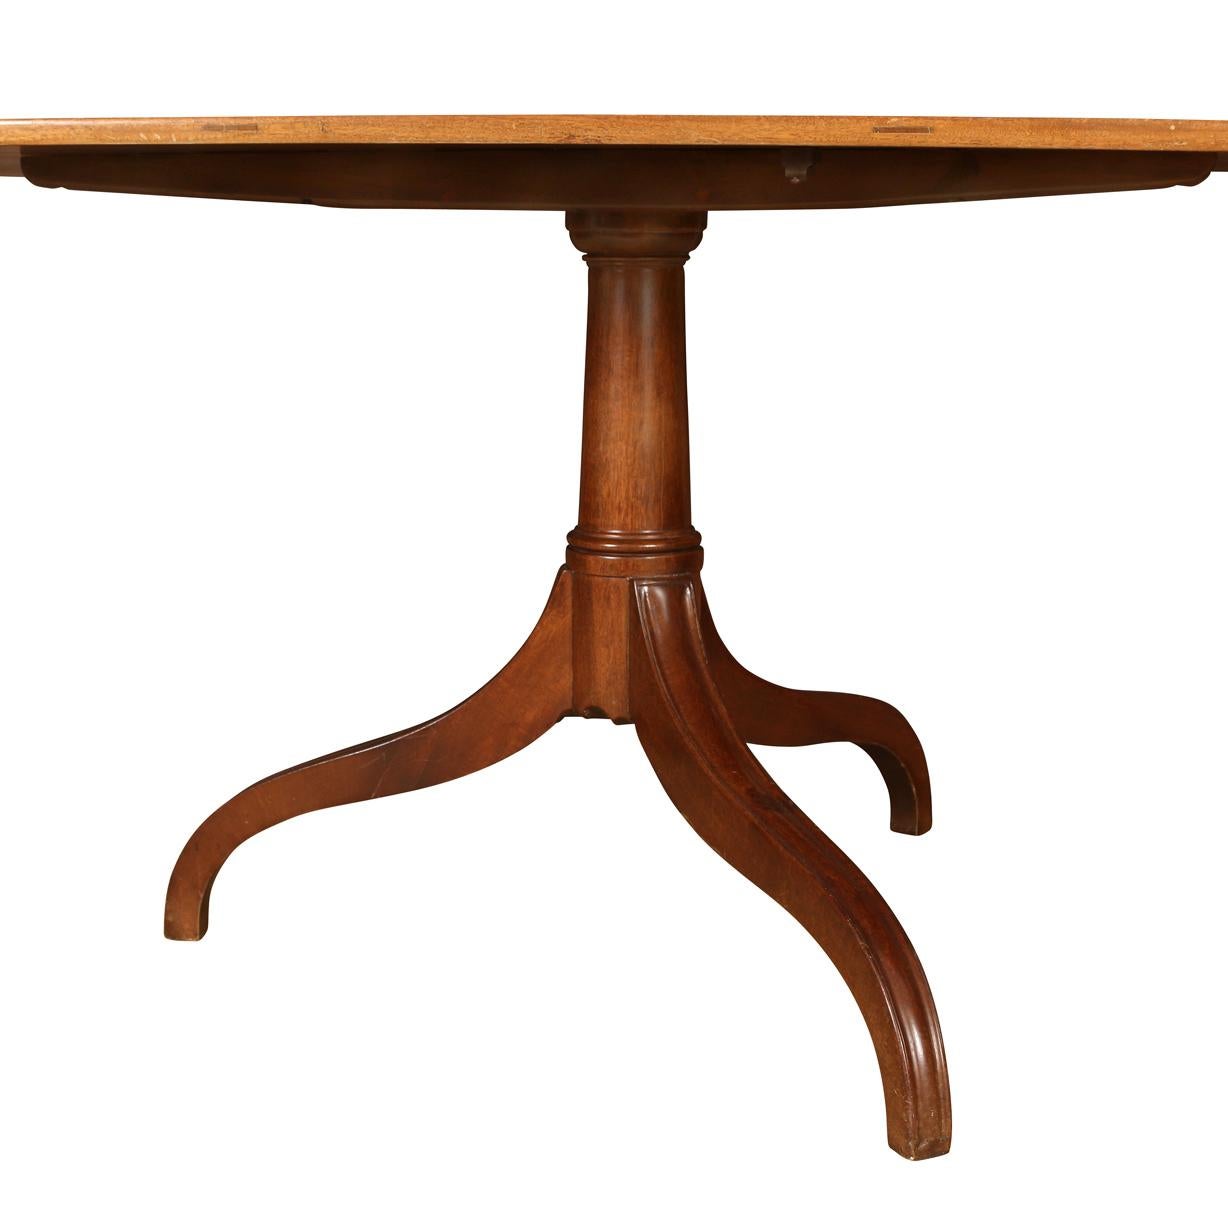 Queen Anne style pedestal dining table with three curved legs and rectangular top with rounded corners.